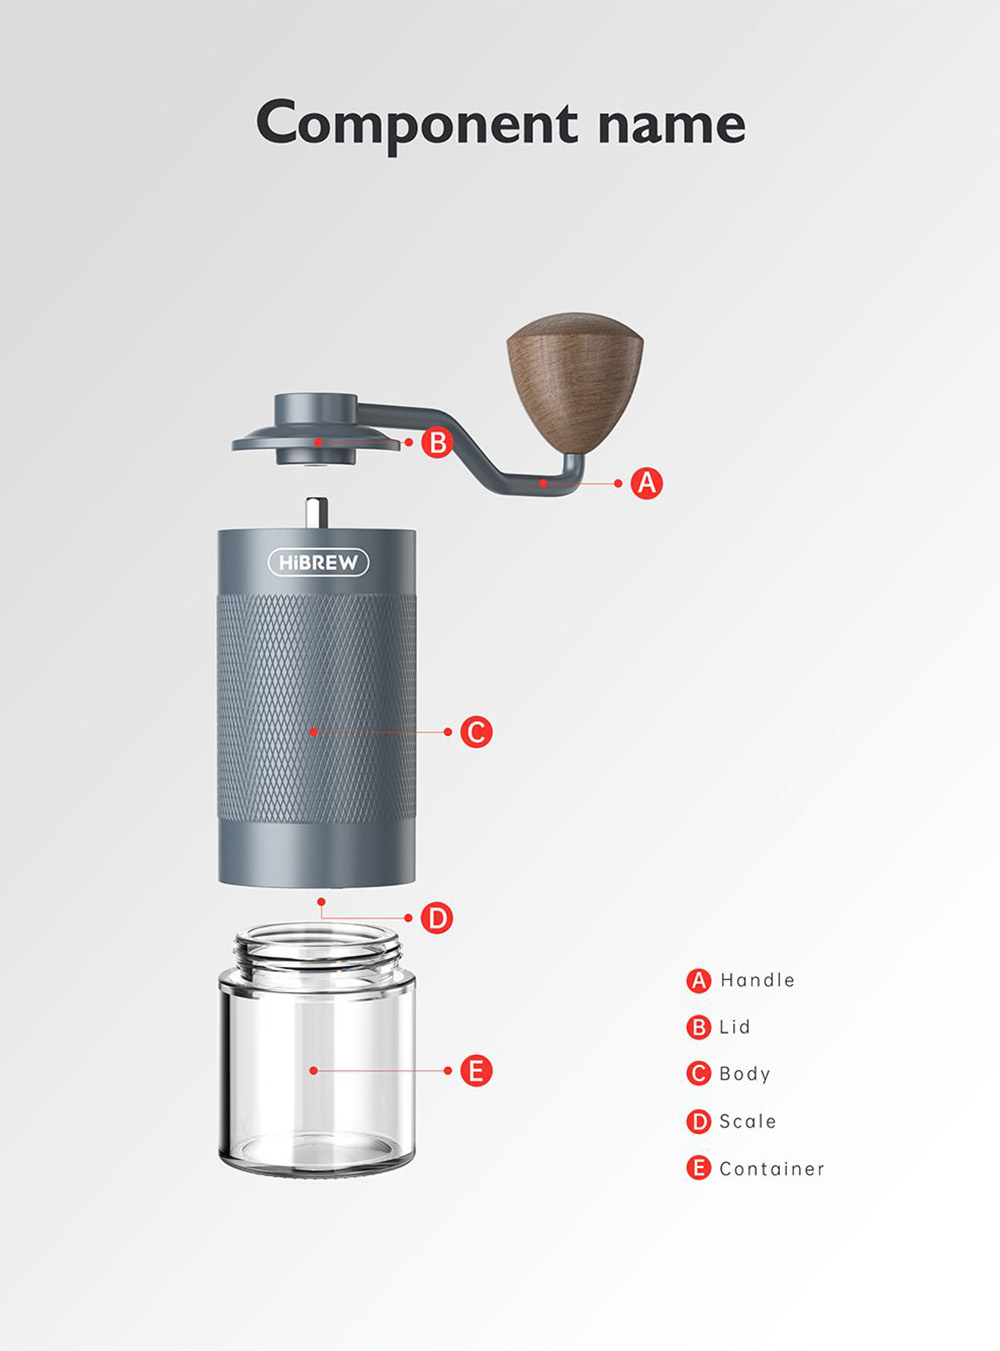 HiBREW G4 Manual Coffee Grinder, Portable Aluminium Hand Grinder with Visible Glass Container, 18g Coffee Beans Capacity